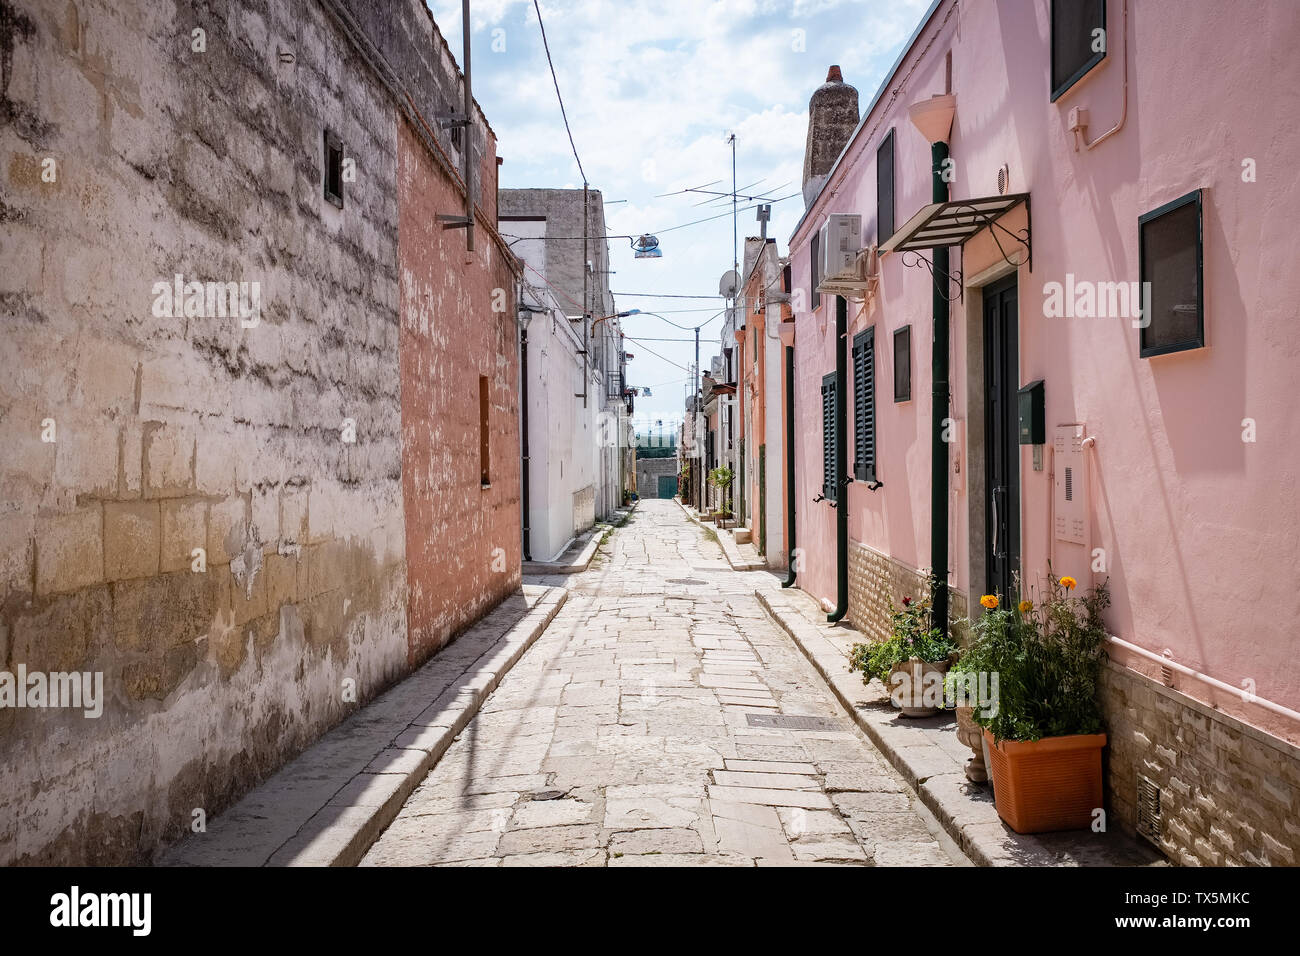 Stone paved alley with typical houses. Spinazzola, Apulia region, Italy Stock Photo